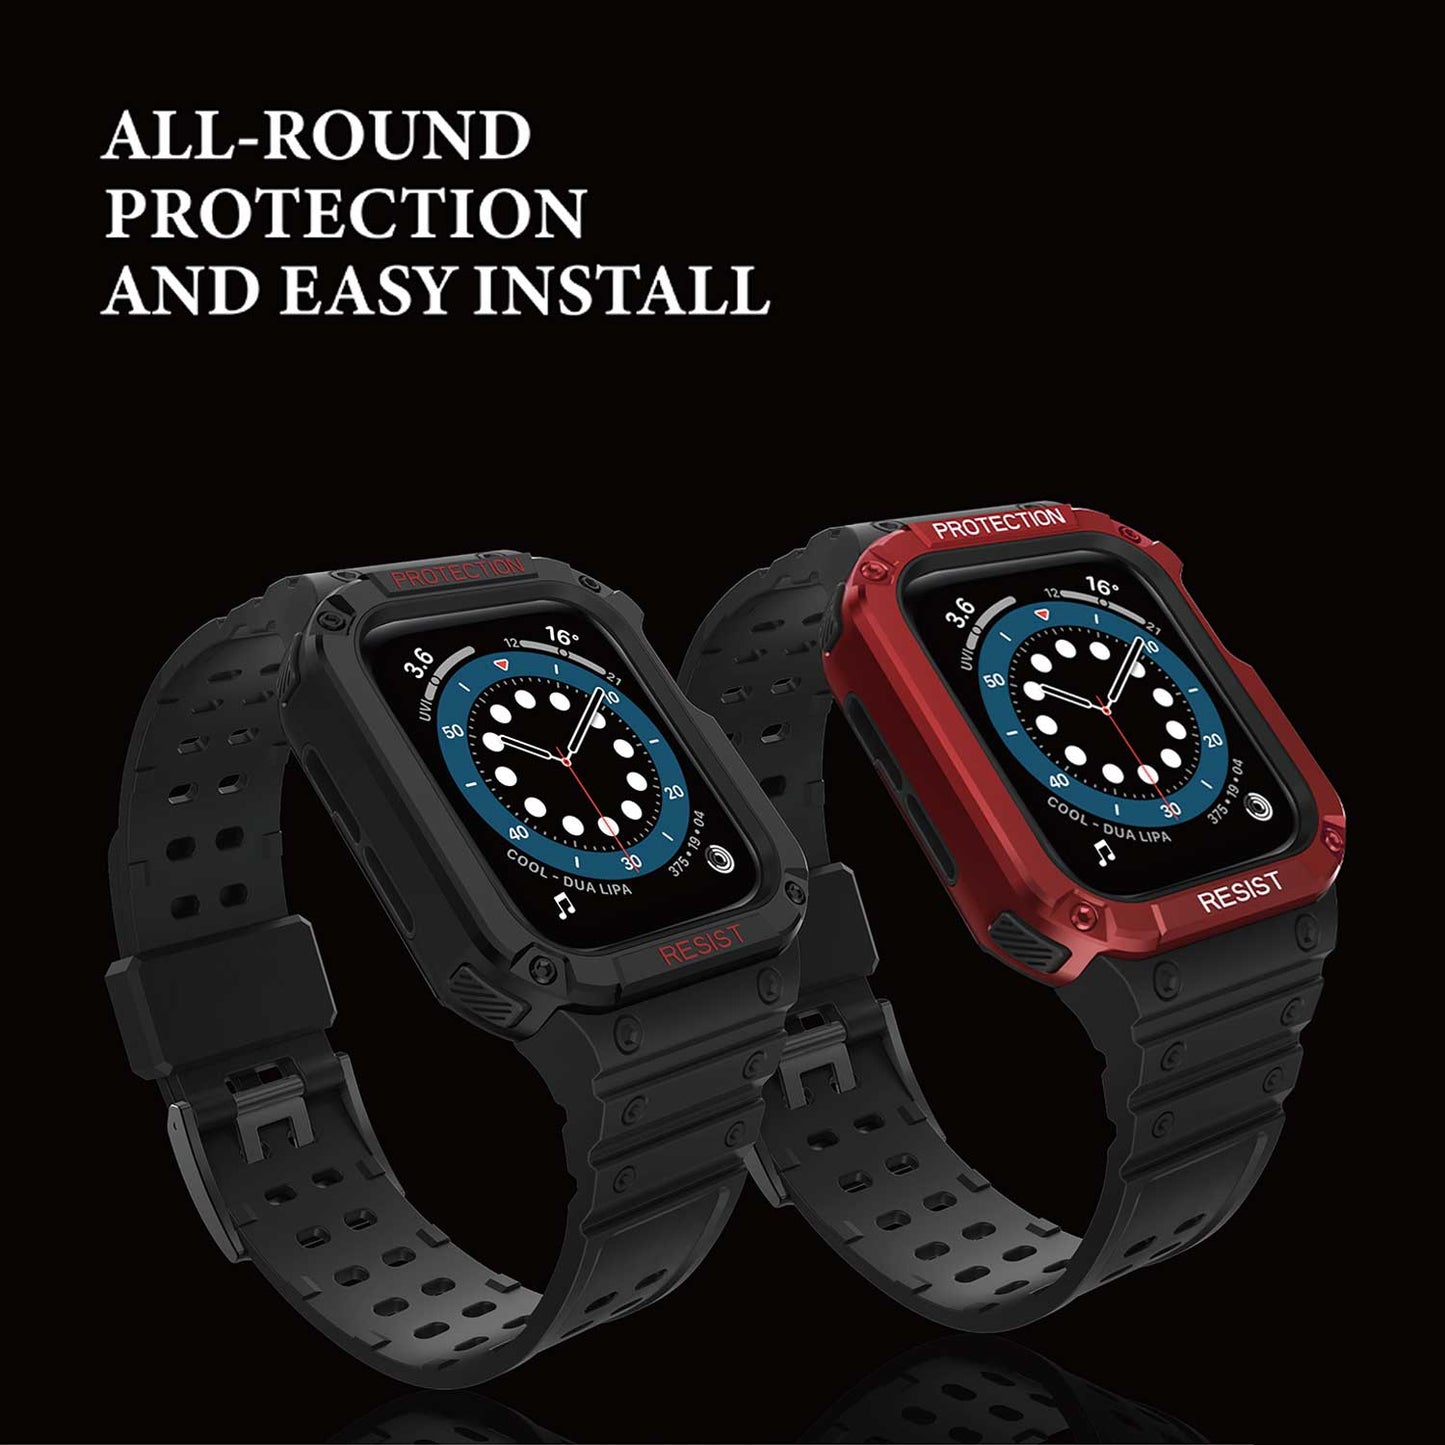 Tough On Apple Watch Band with Case Series 1 / 2 / 3 38mm Rugged Protection Black/Red